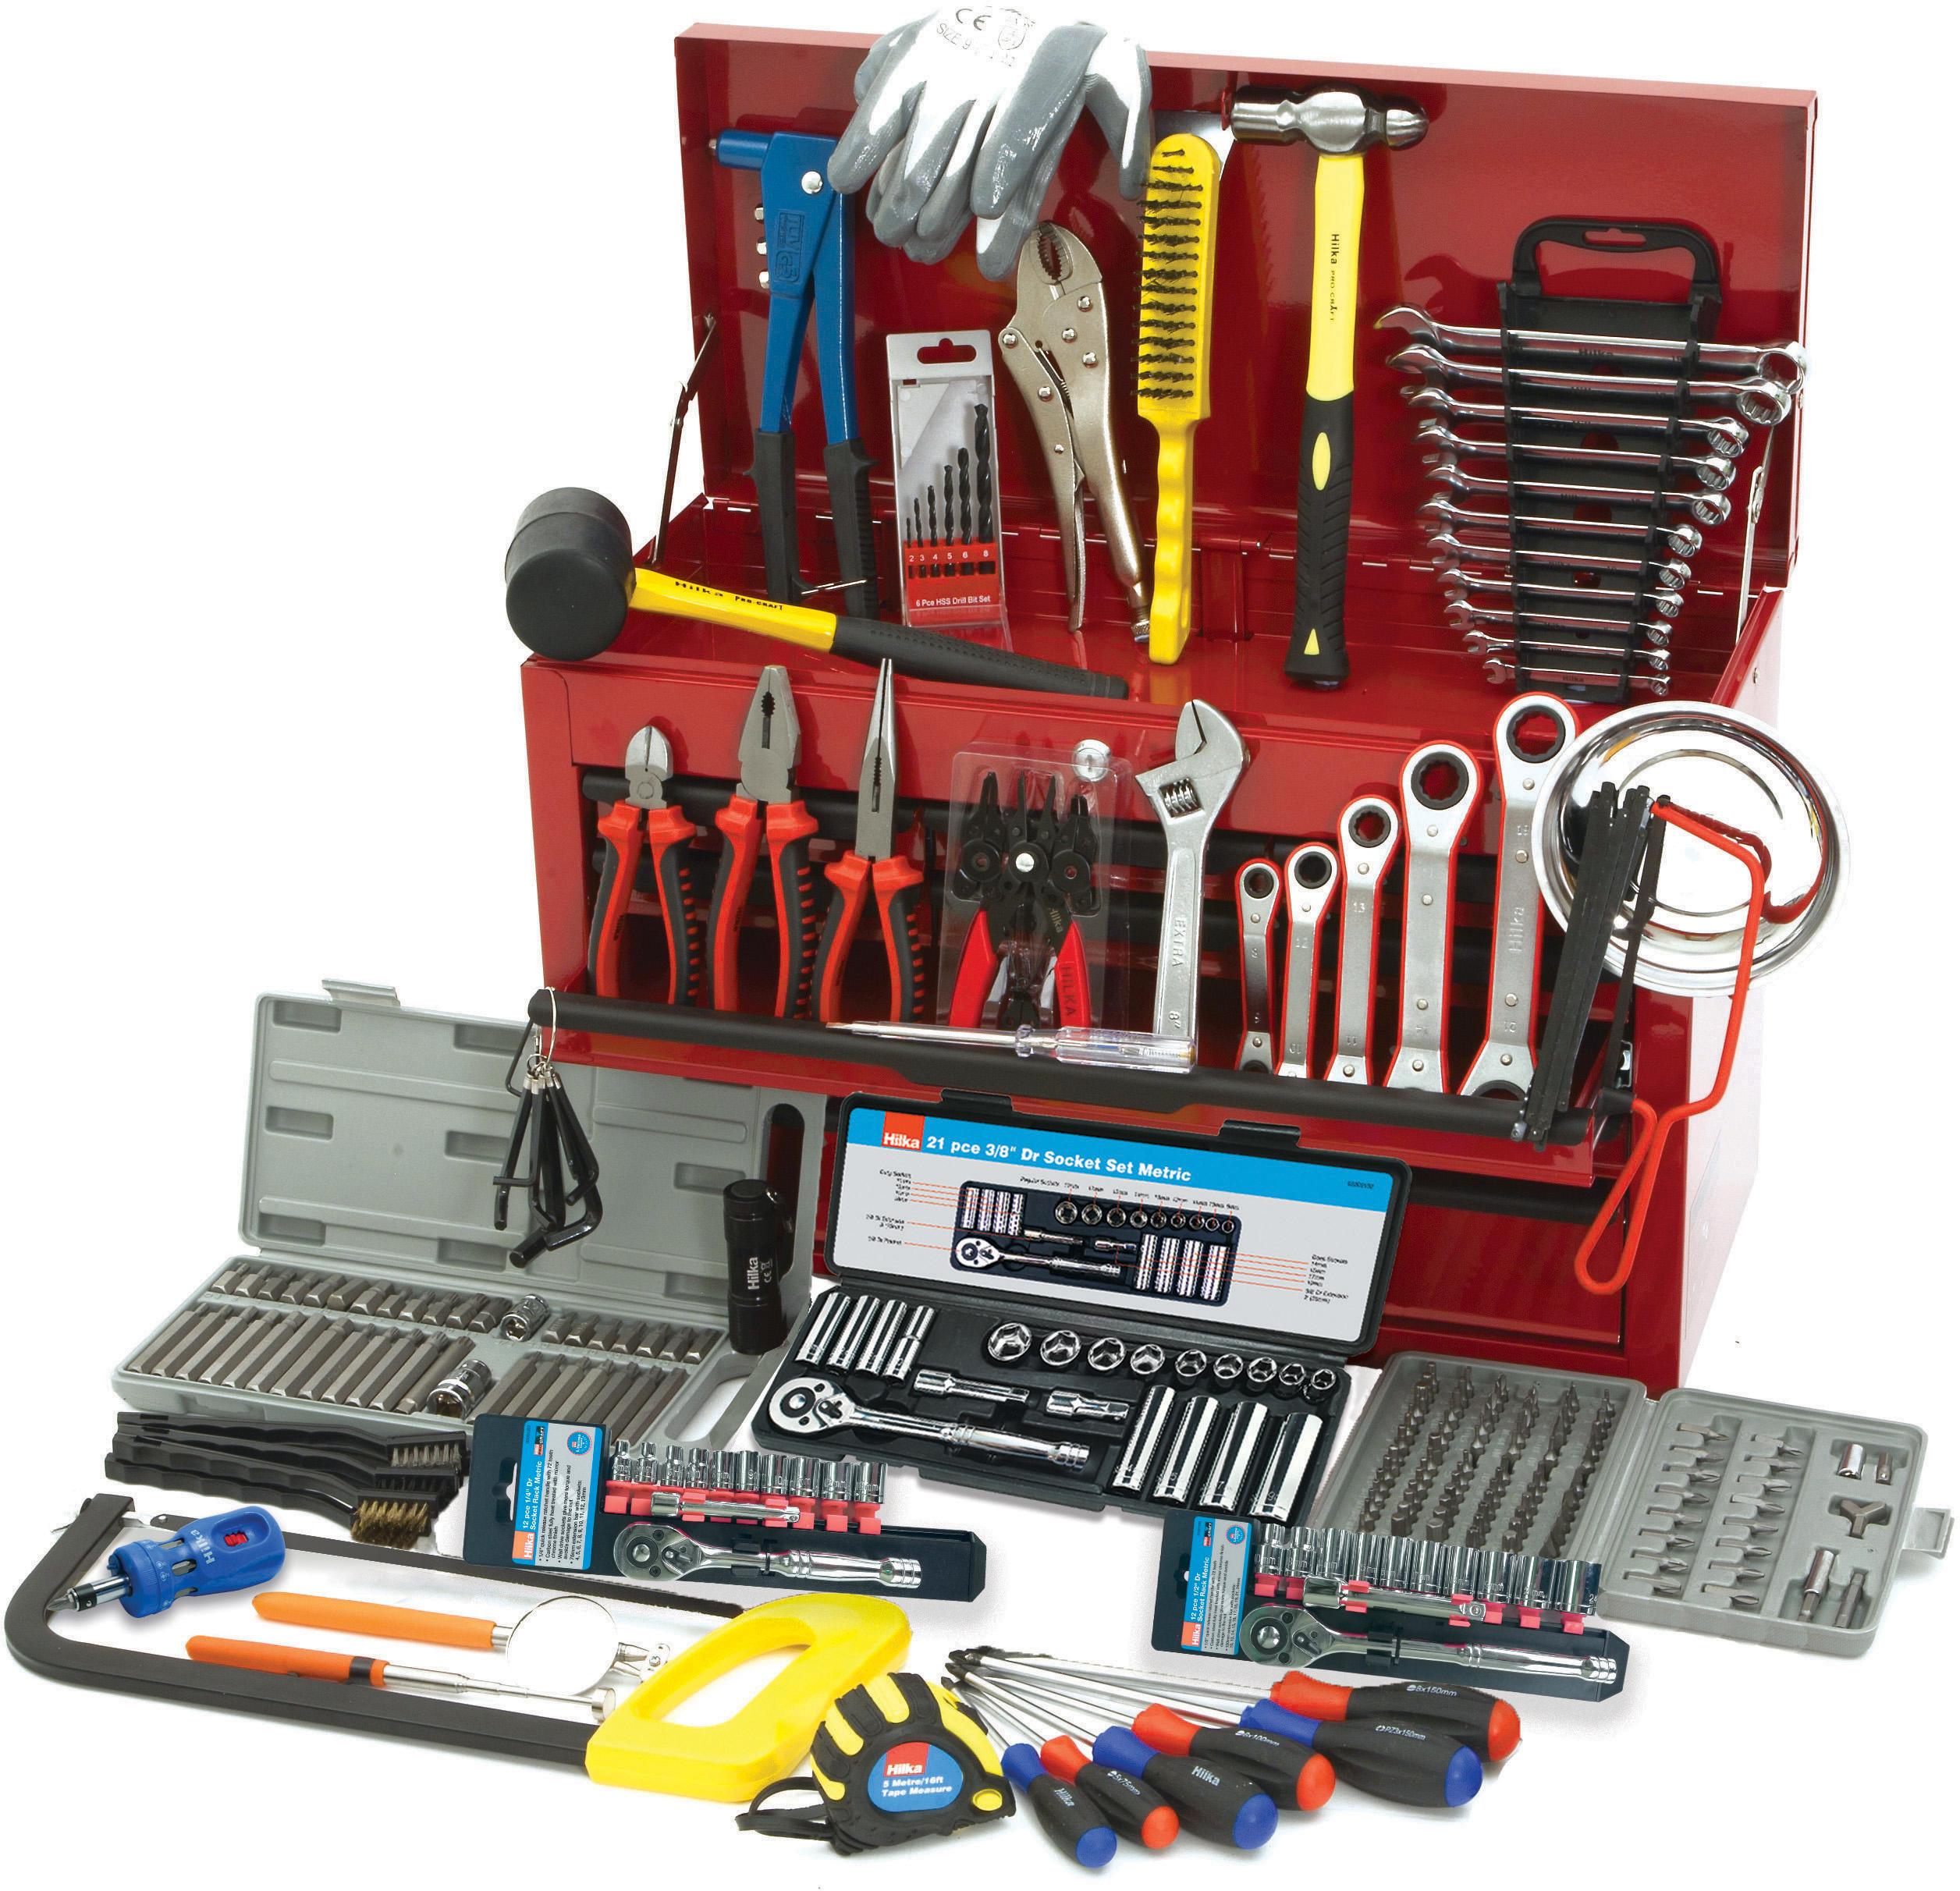 Hilka 270 Piece Tool Kit In Heavy Duty Tool Chest